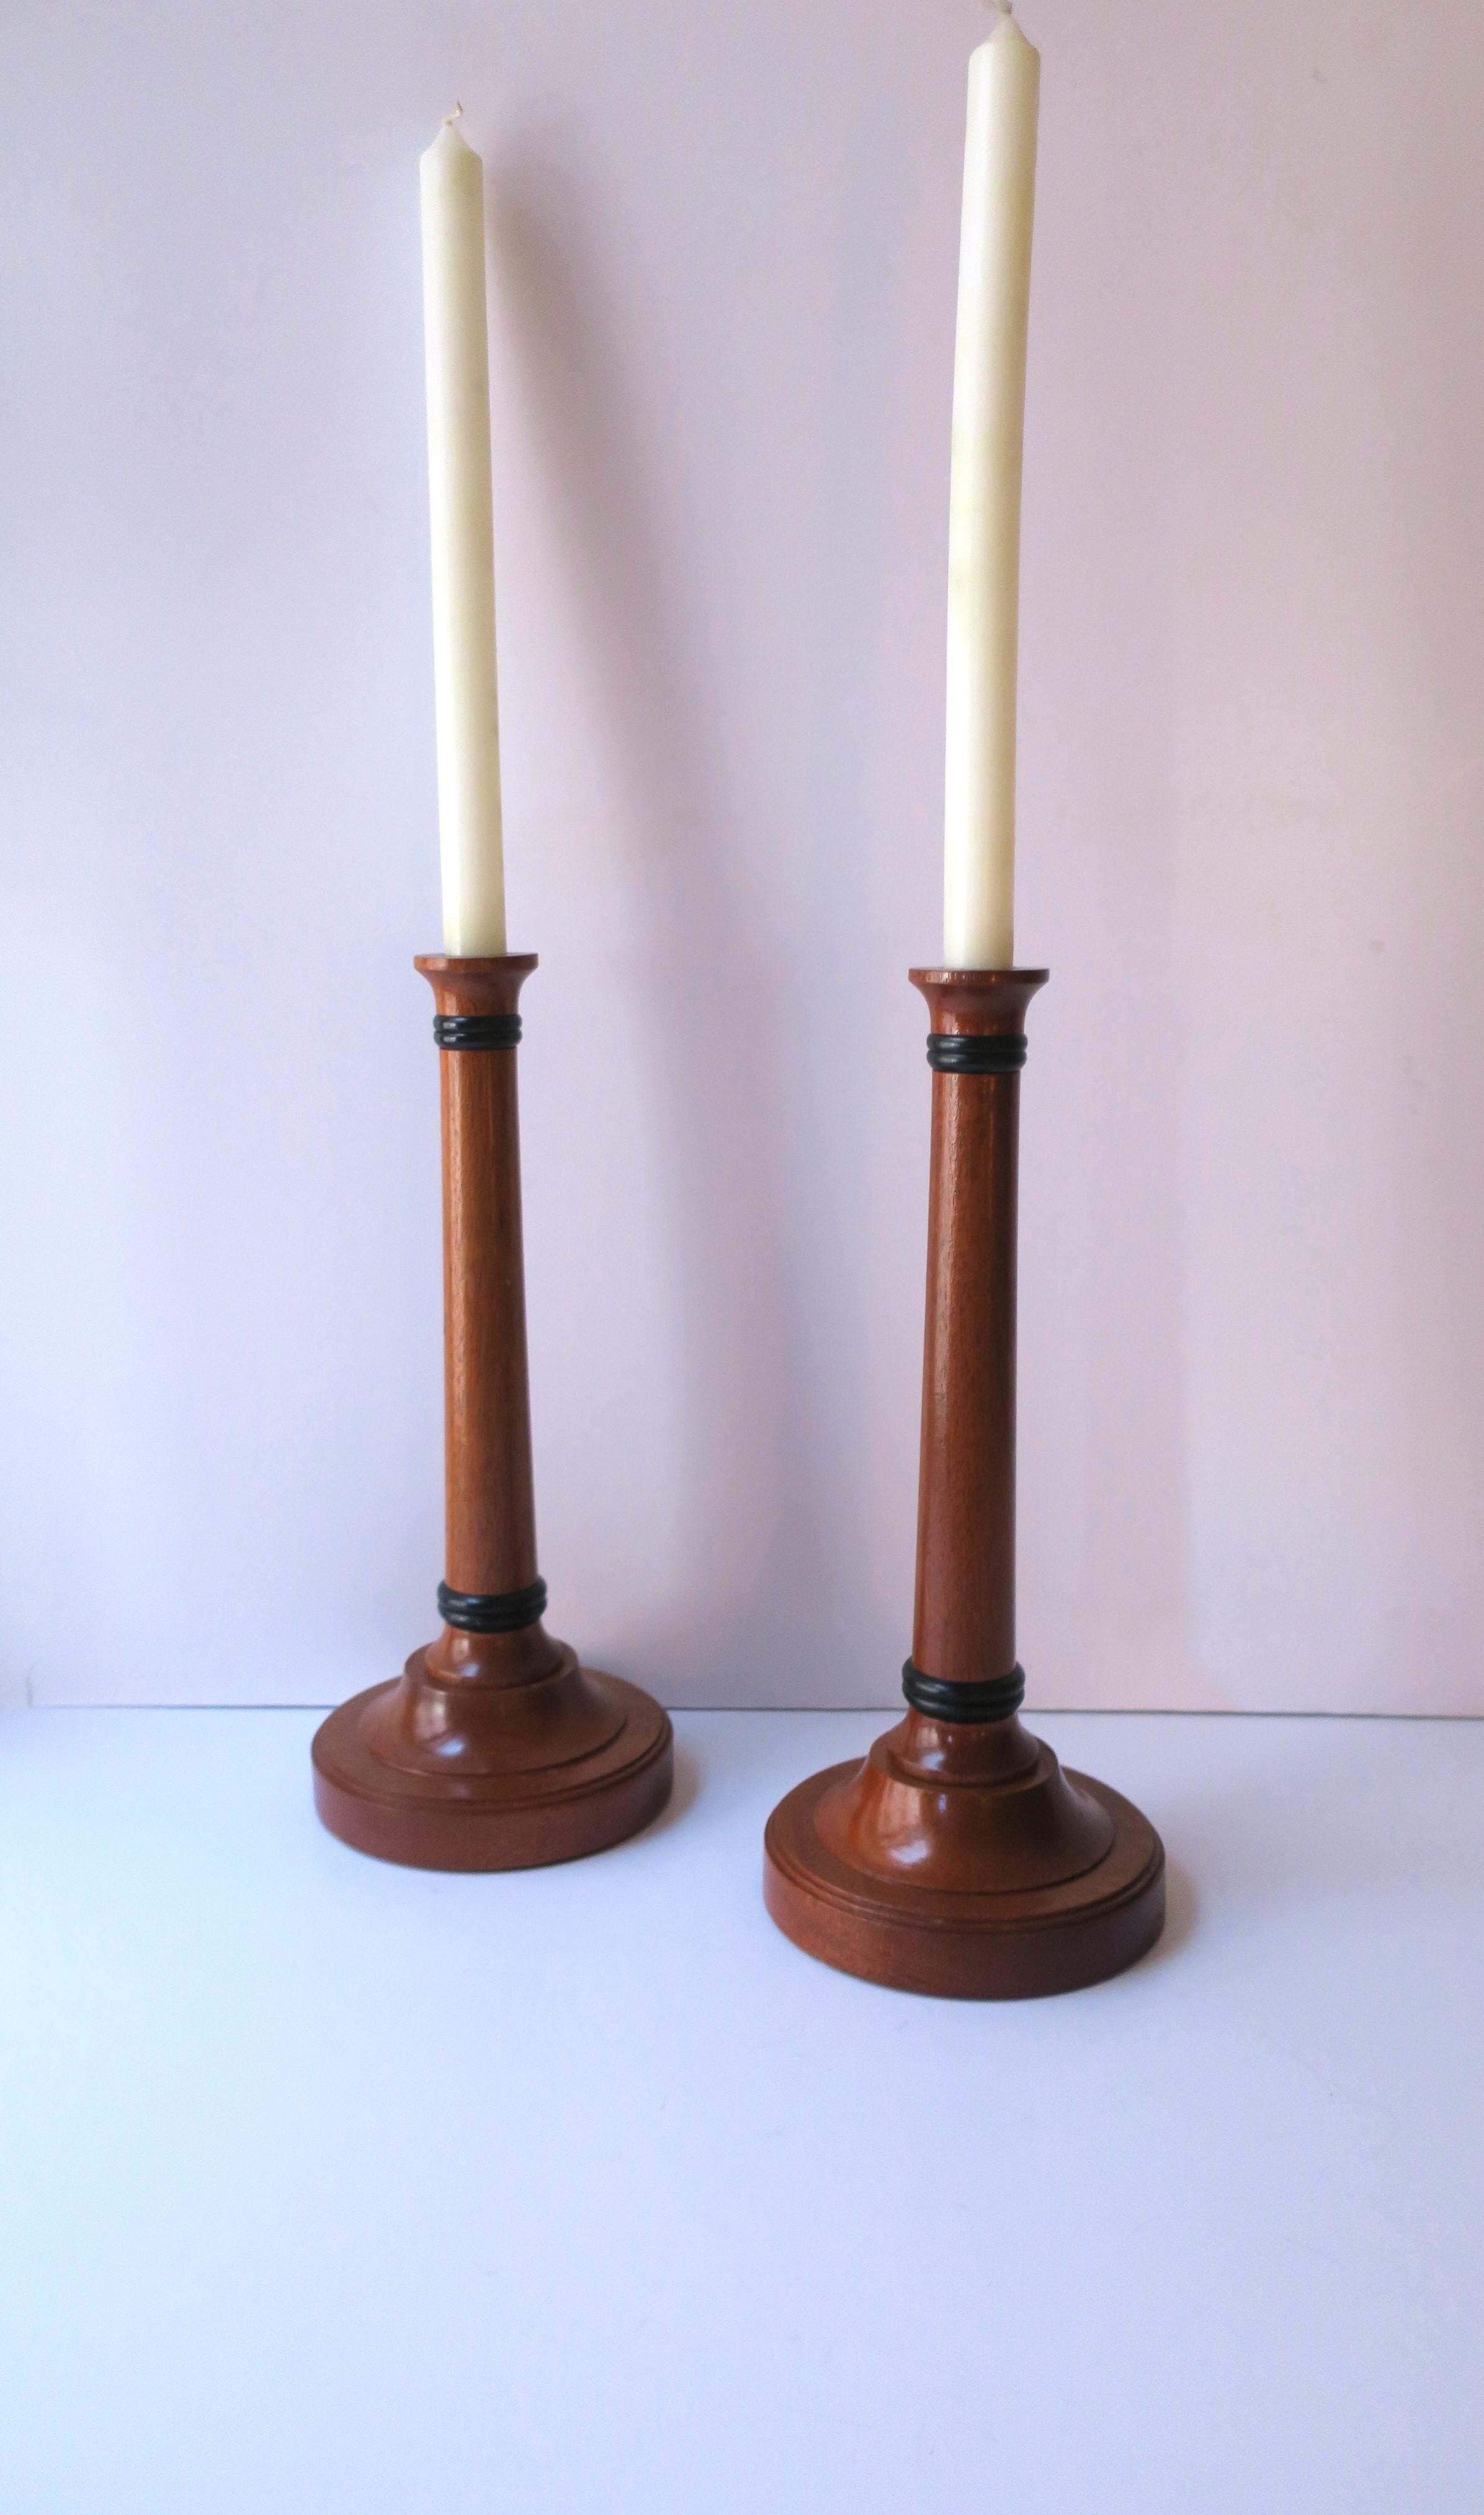 20th Century English Wood Candlesticks Holders, Pair For Sale